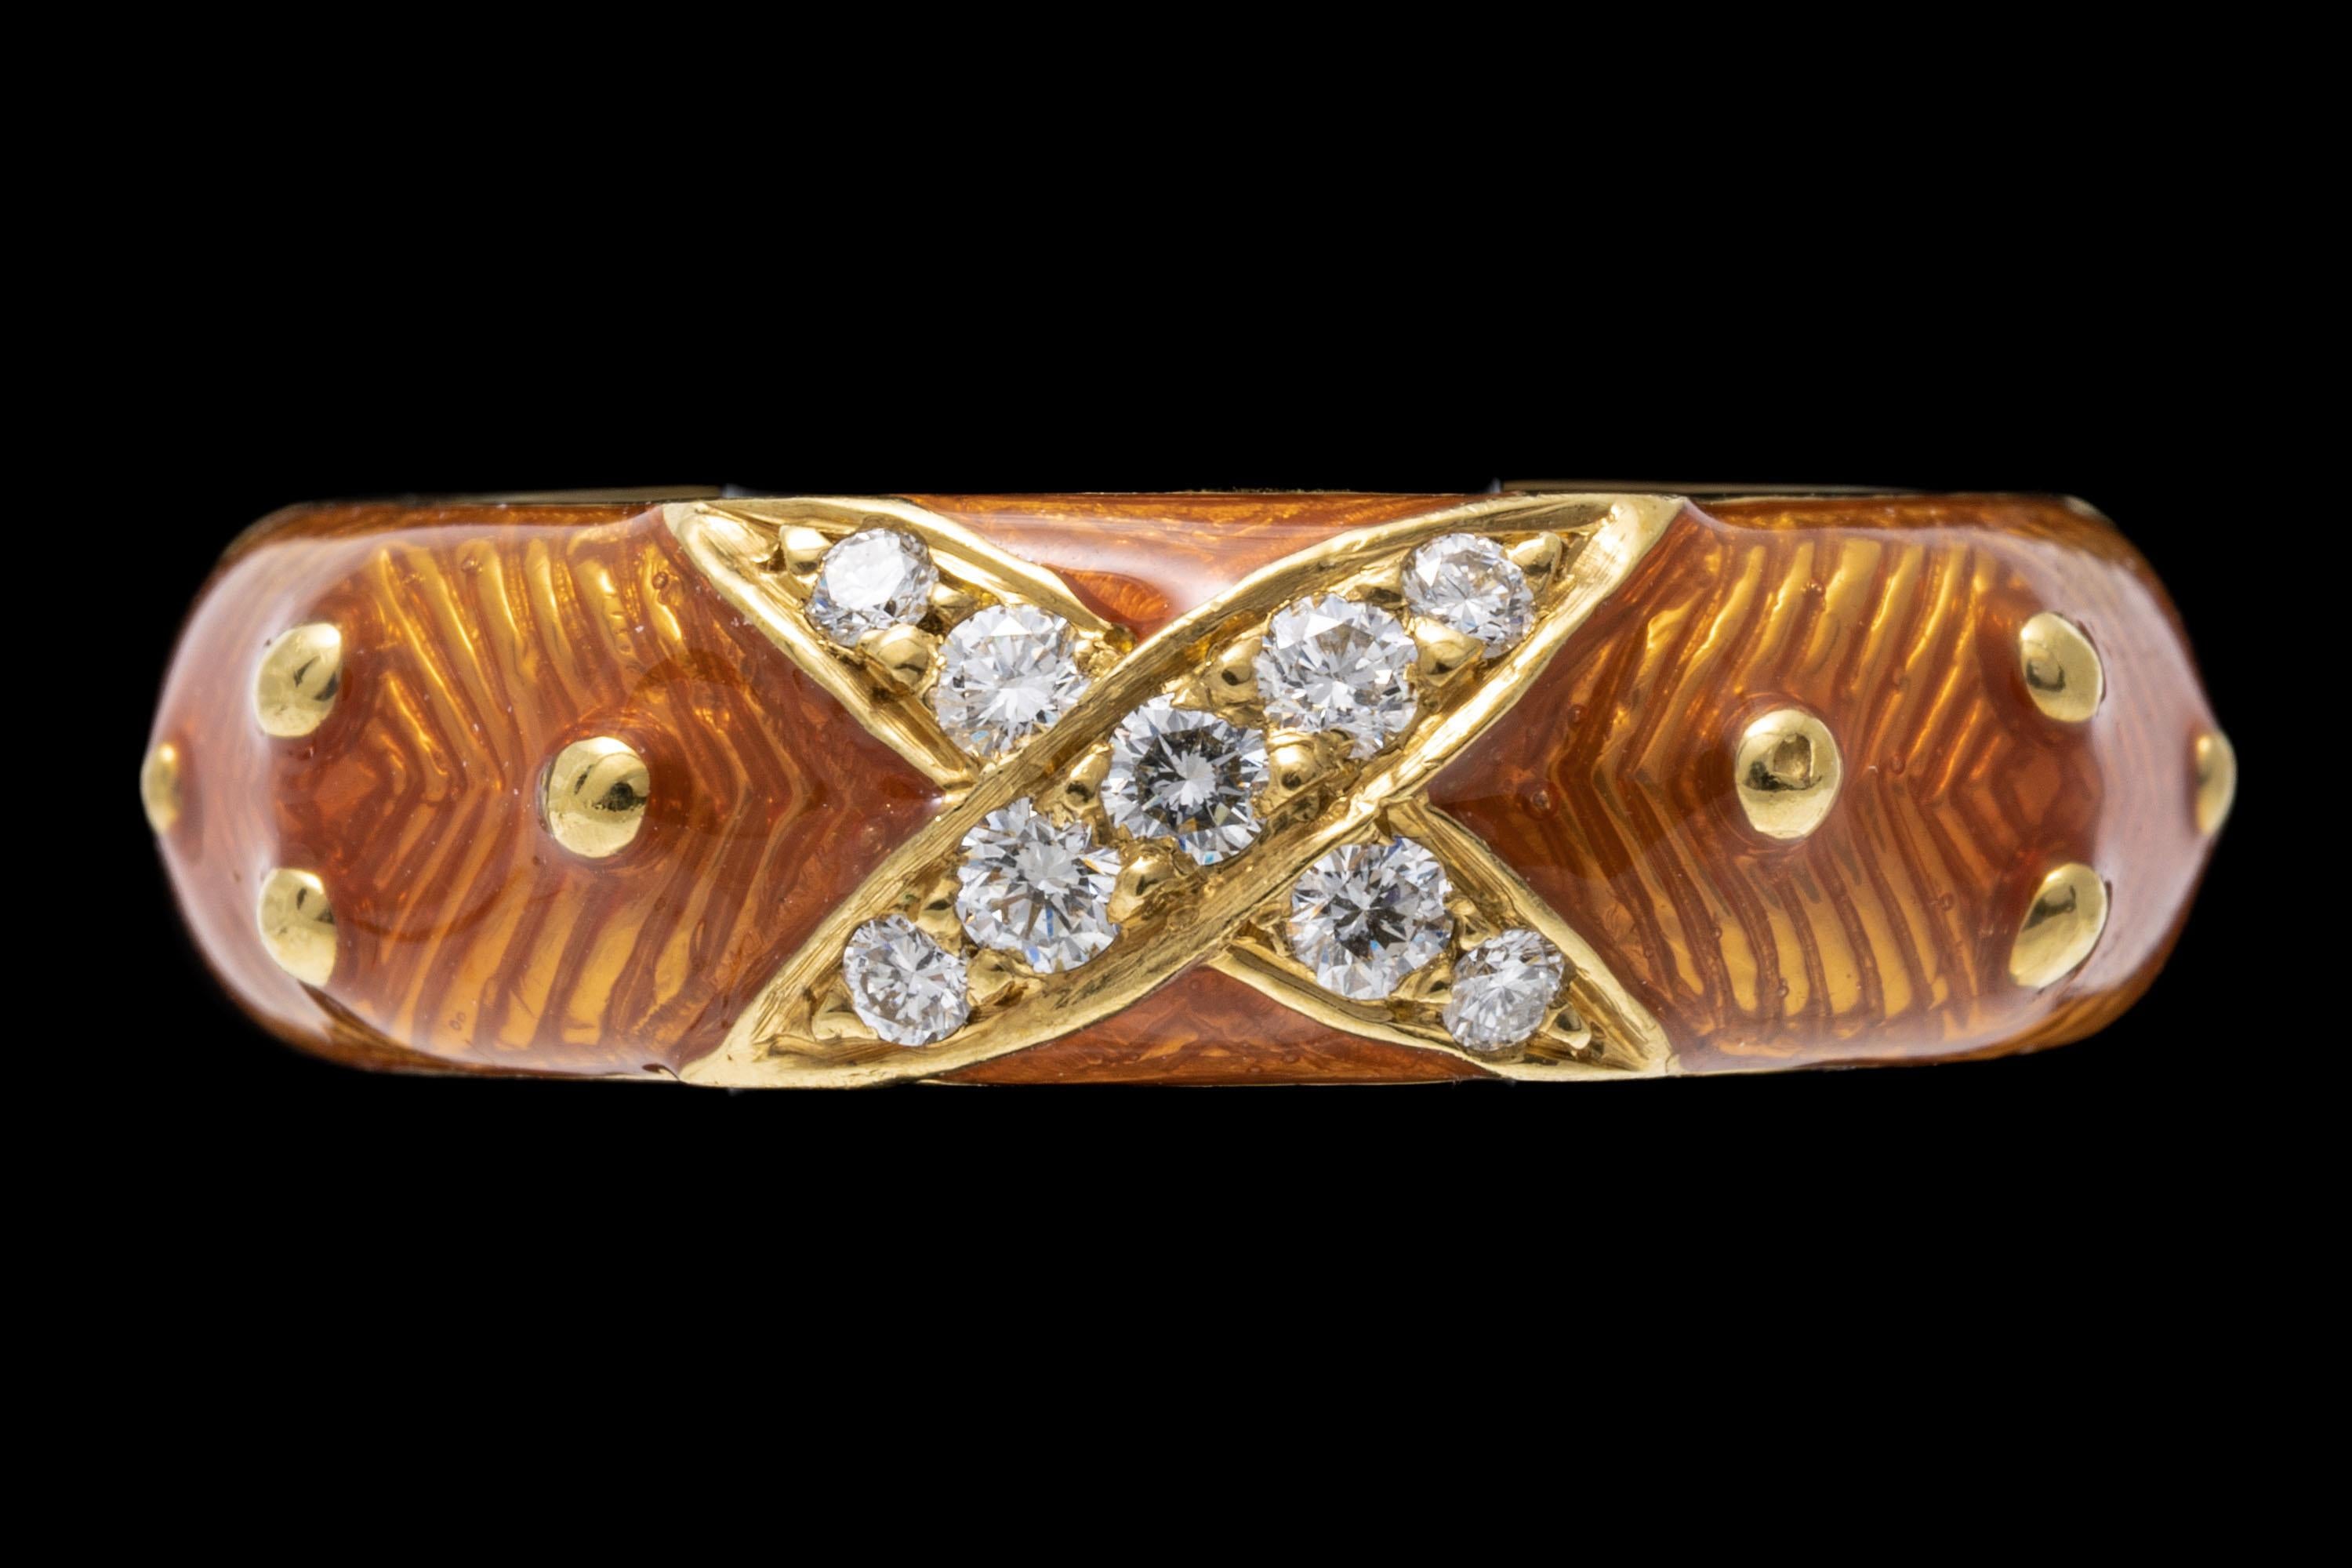 18k yellow gold ring. This beautiful ring is by HIdalgo, and has a peach guilloche enamel top, decorated with a center 